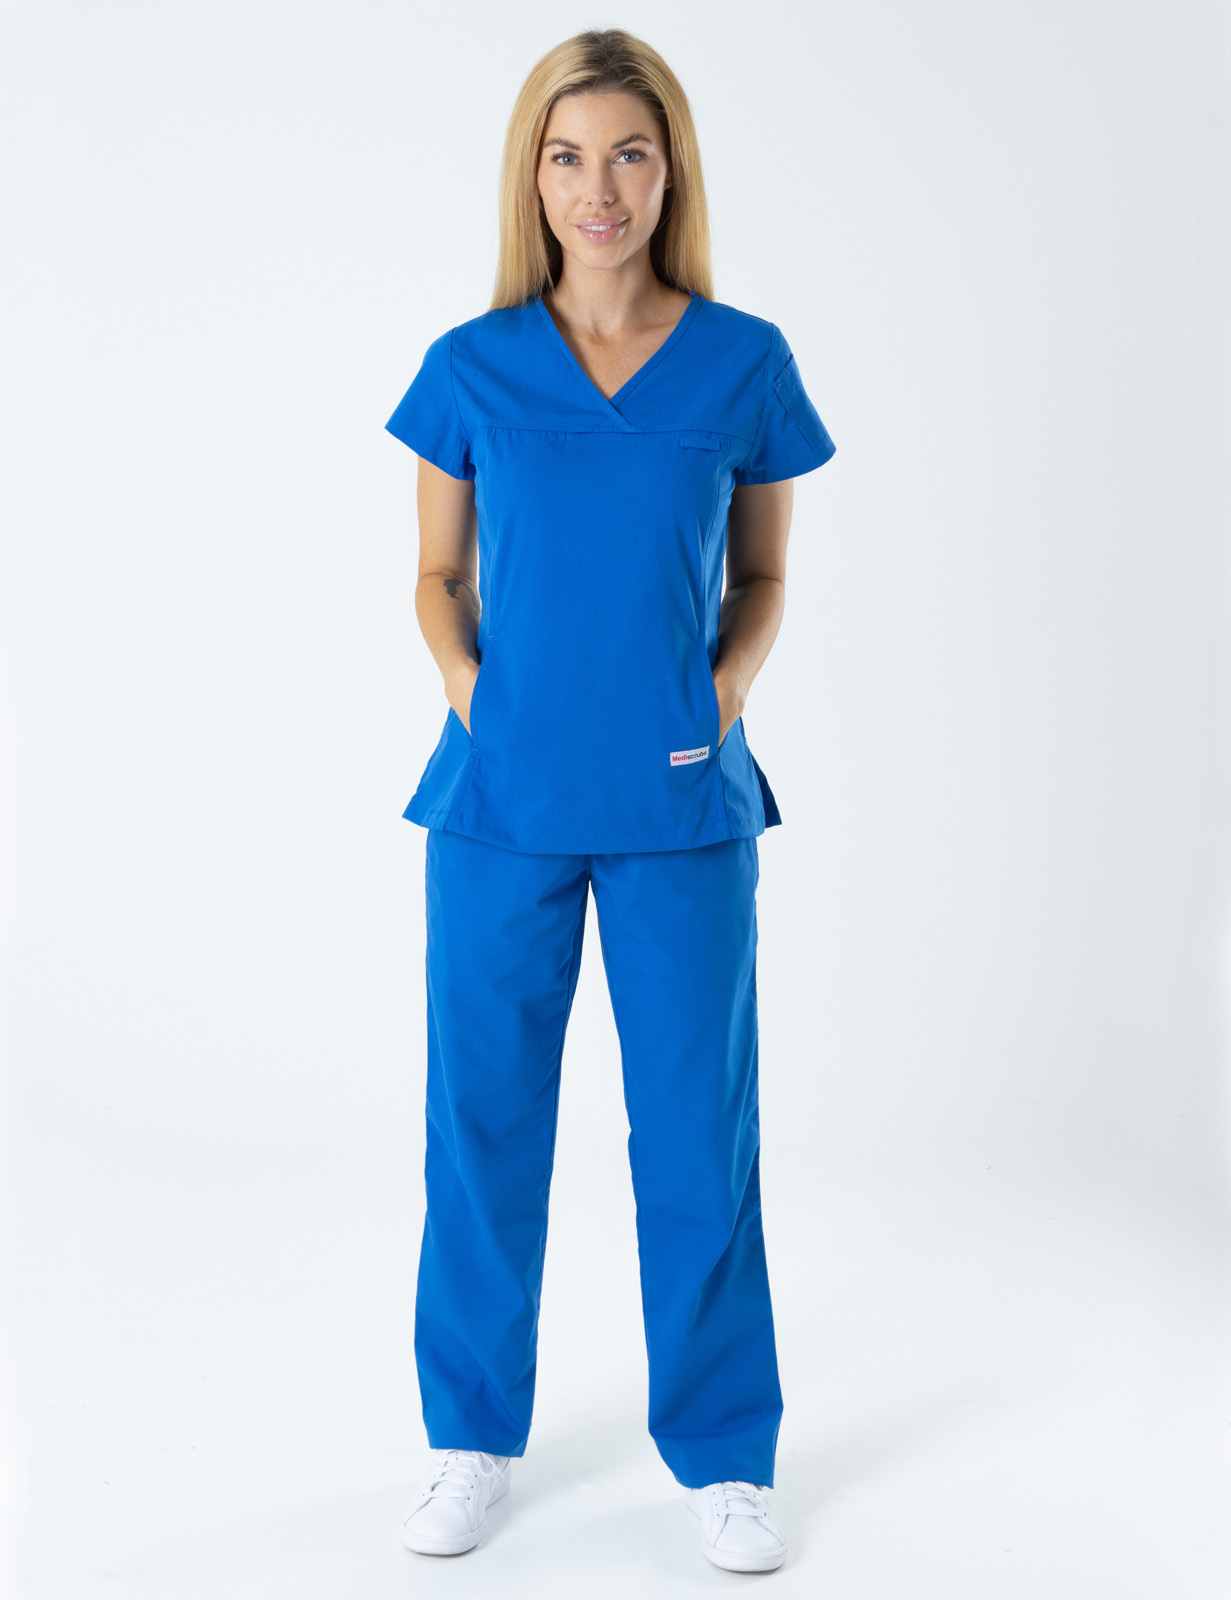 Logan Hospital - Residents (Women's Fit Solid Scrub Top and Cargo Pants in Royal incl Logos)